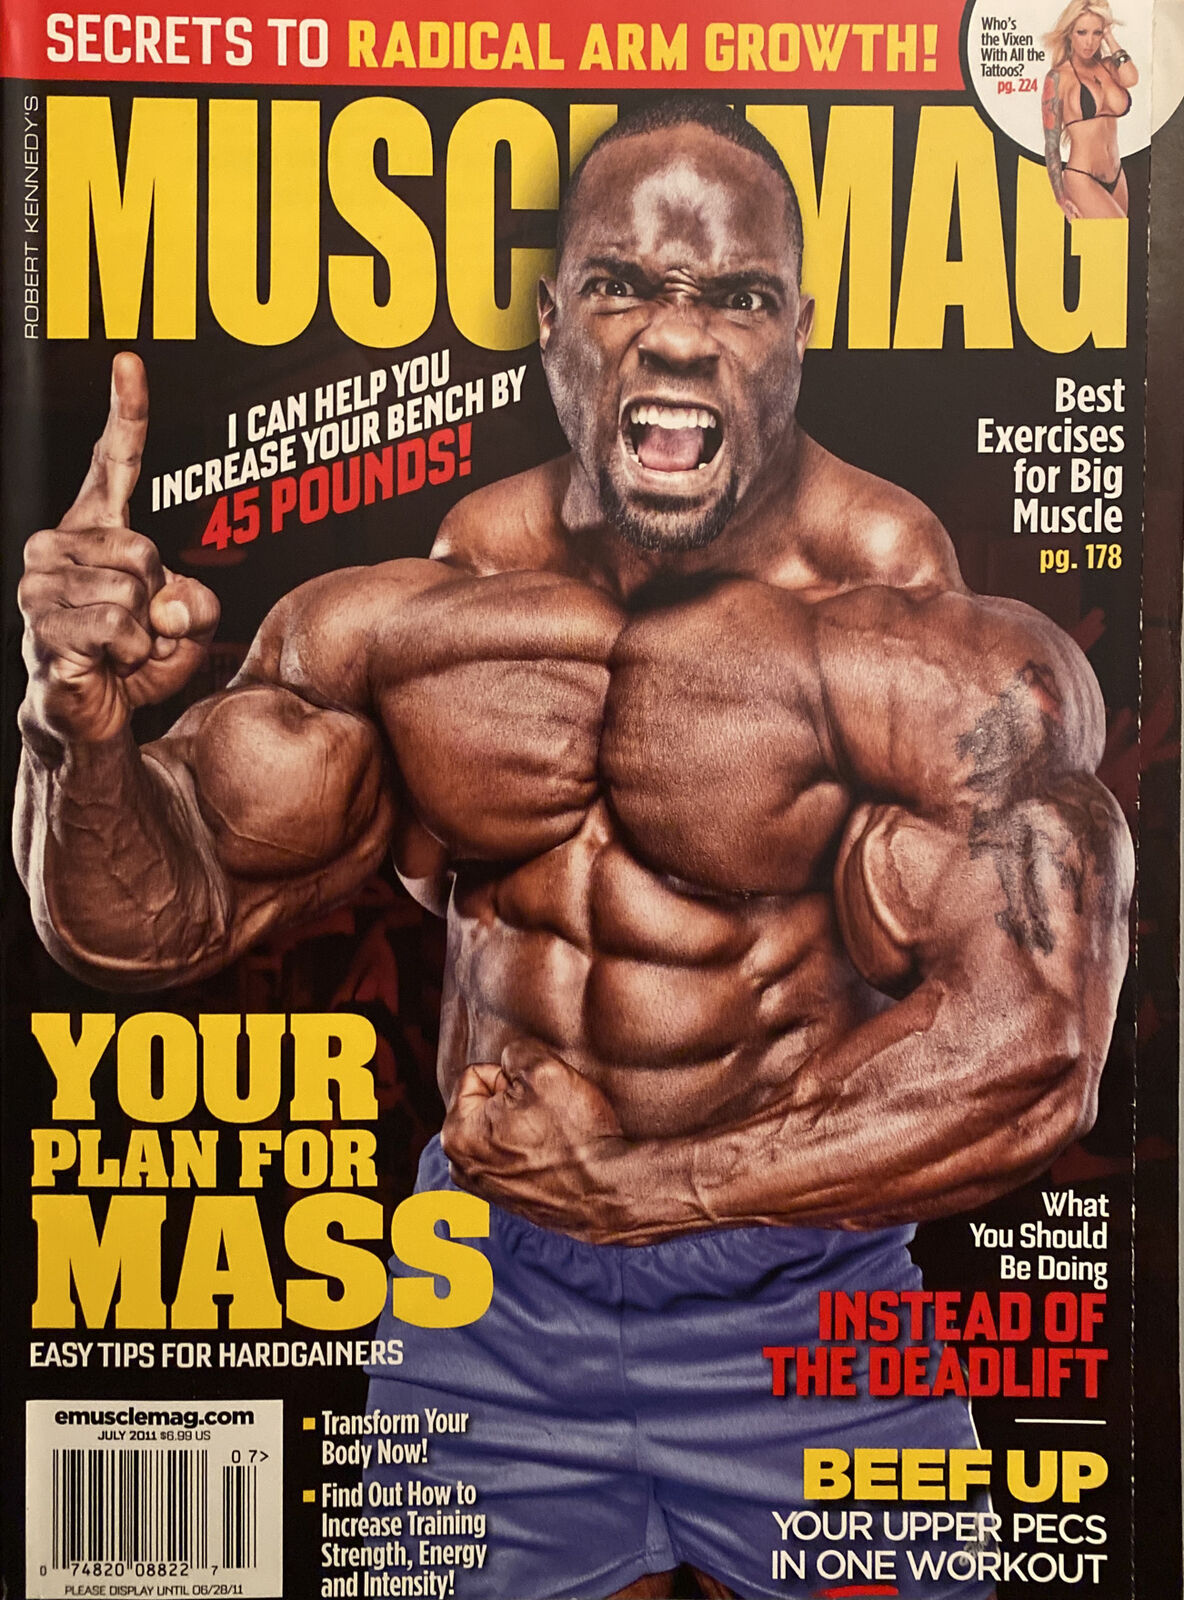 Muscle Mag July 2011 magazine back issue Muscle Mag magizine back copy Muscle Mag July 2011 Bodybuilding and Fitness Magazine Back Issue Published by Canadian Robert Kennedy and Founded in 1974. Secrets To Radical Arm Growth!.